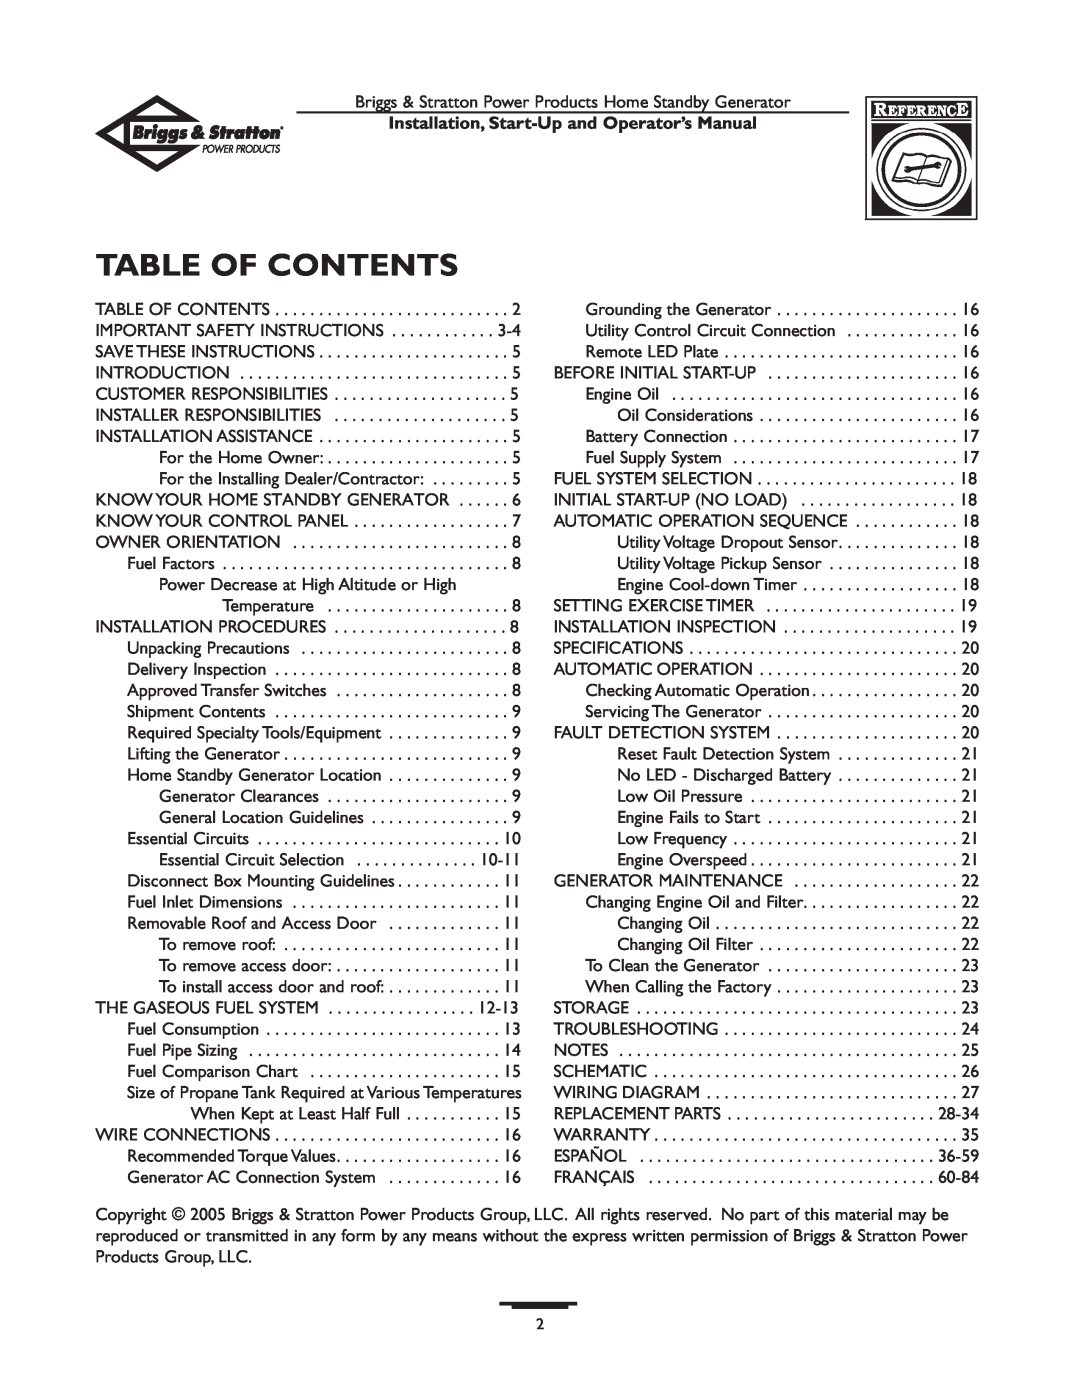 Briggs & Stratton 01897-0 manual Table Of Contents, Installation, Start-Up and Operator’s Manual 